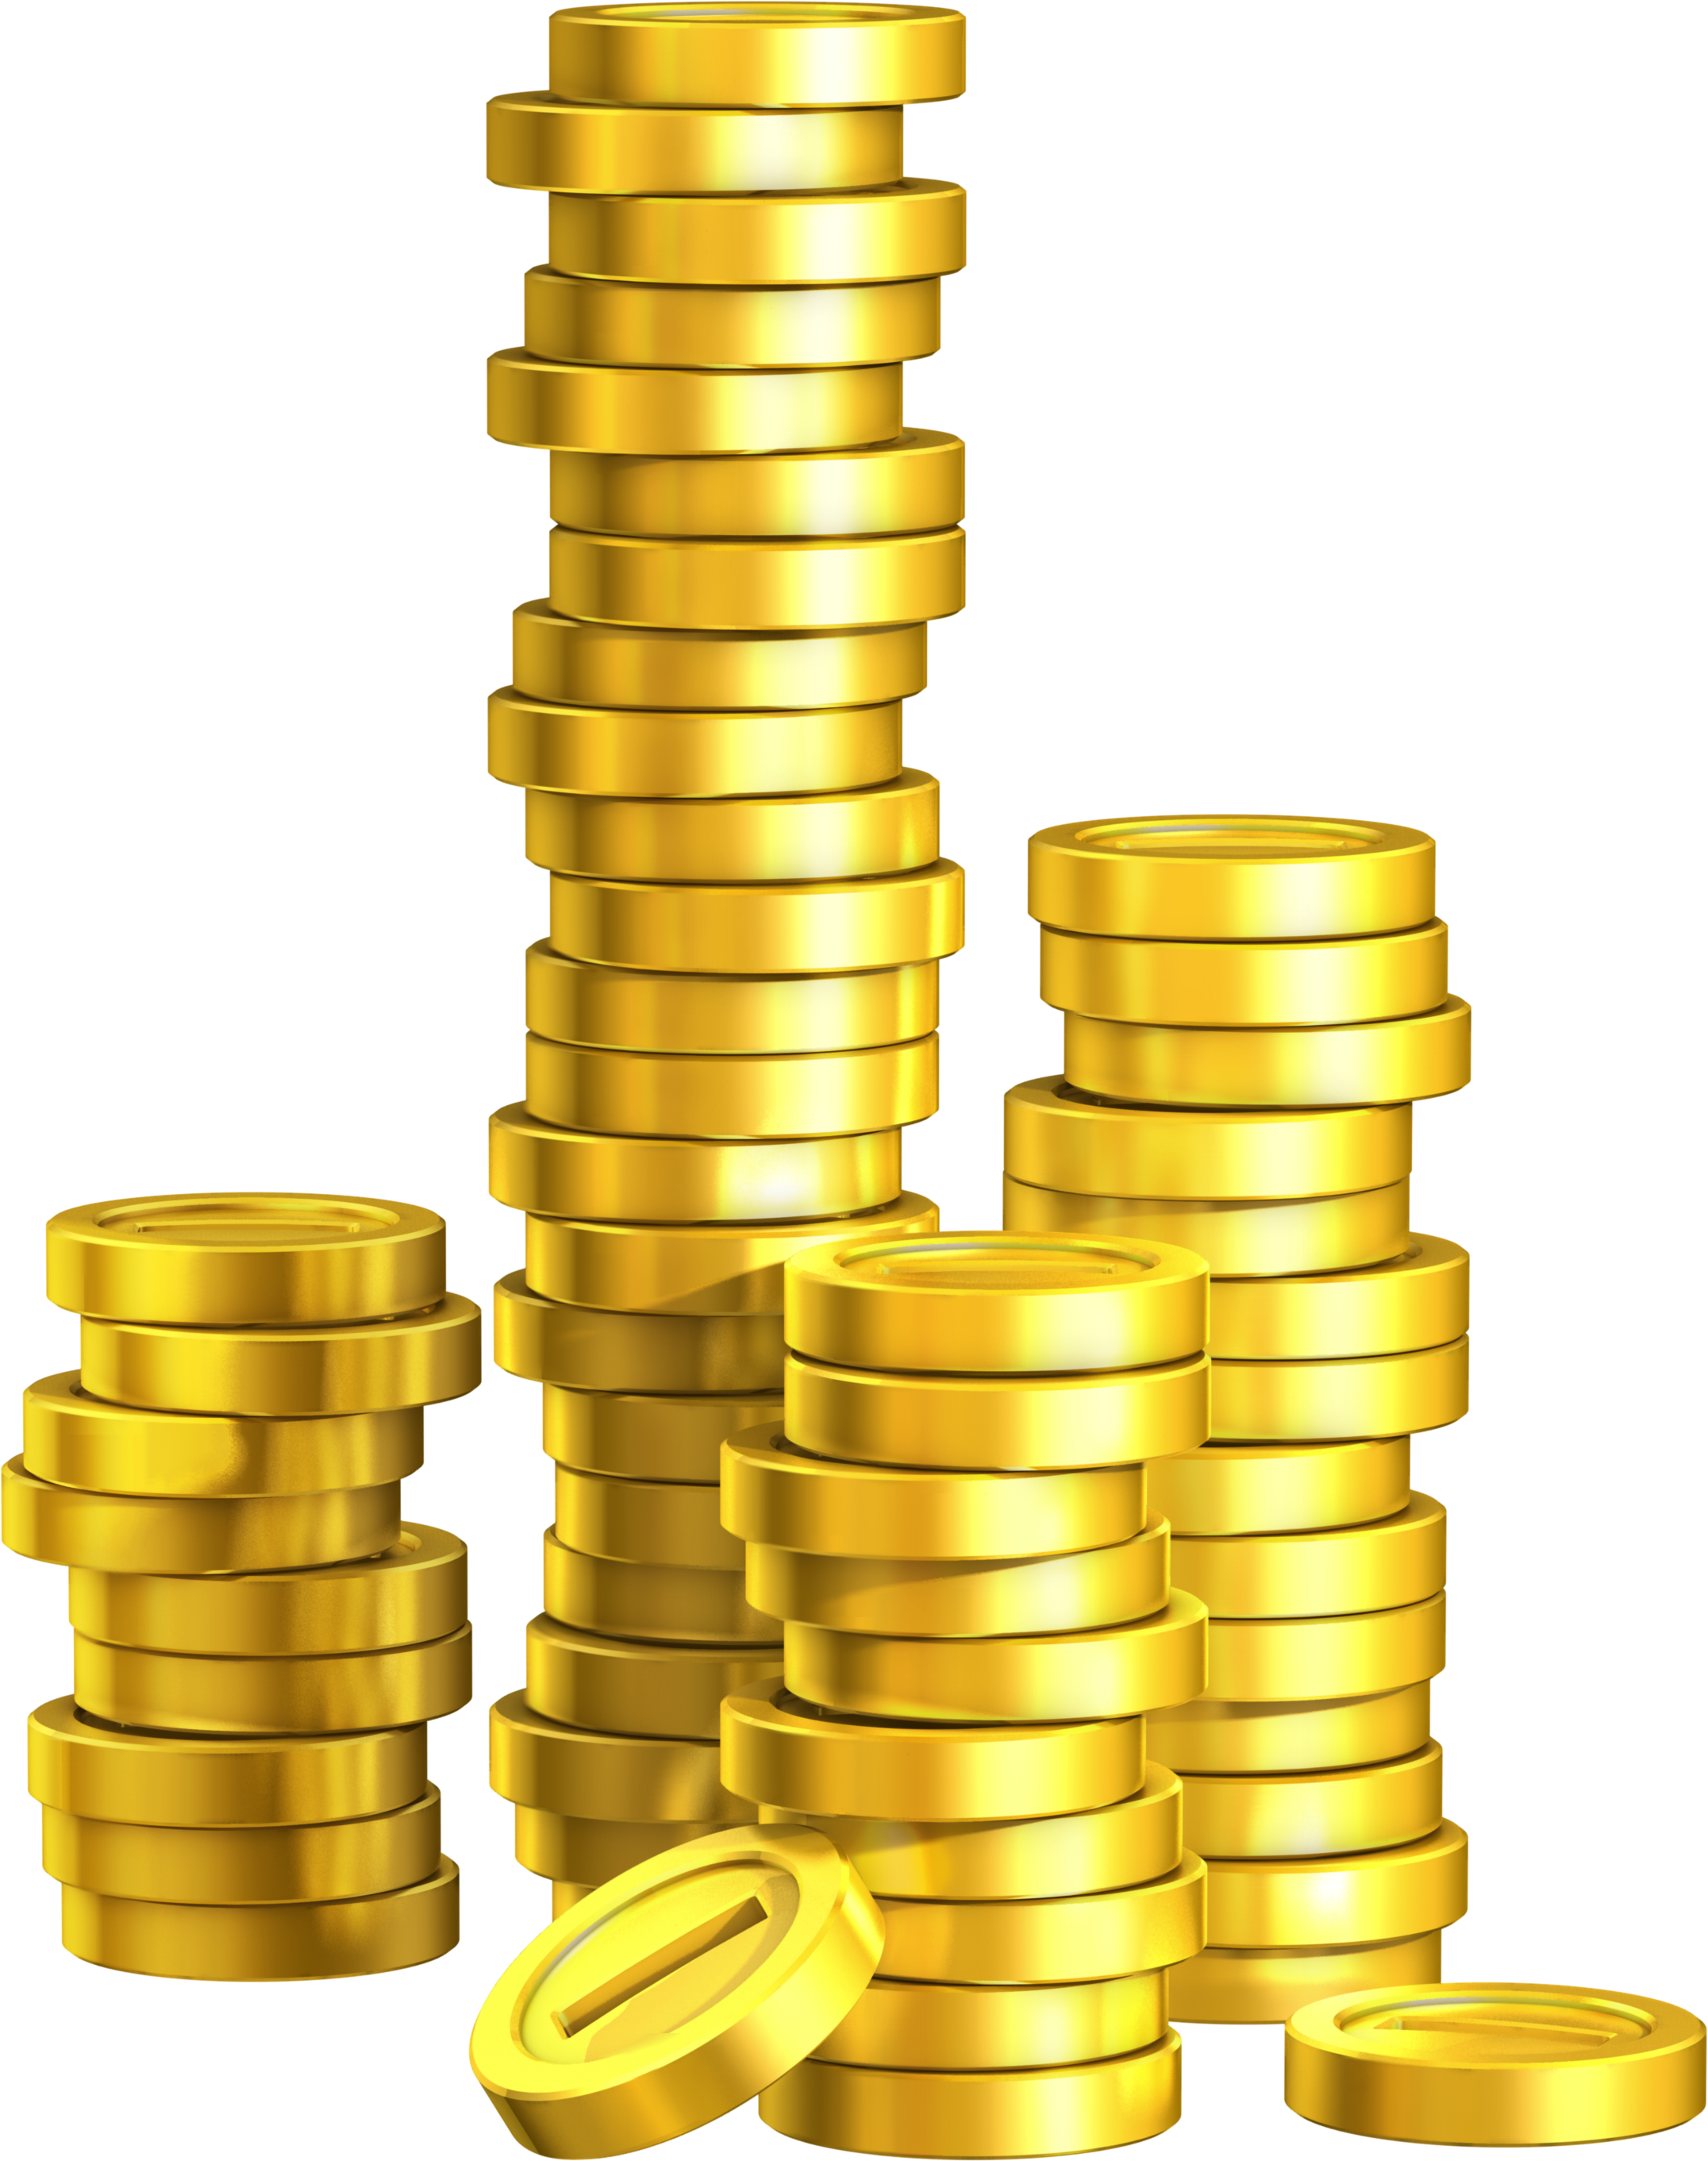 Free Gold Coin Pictures, Download Free Gold Coin Pictures png images